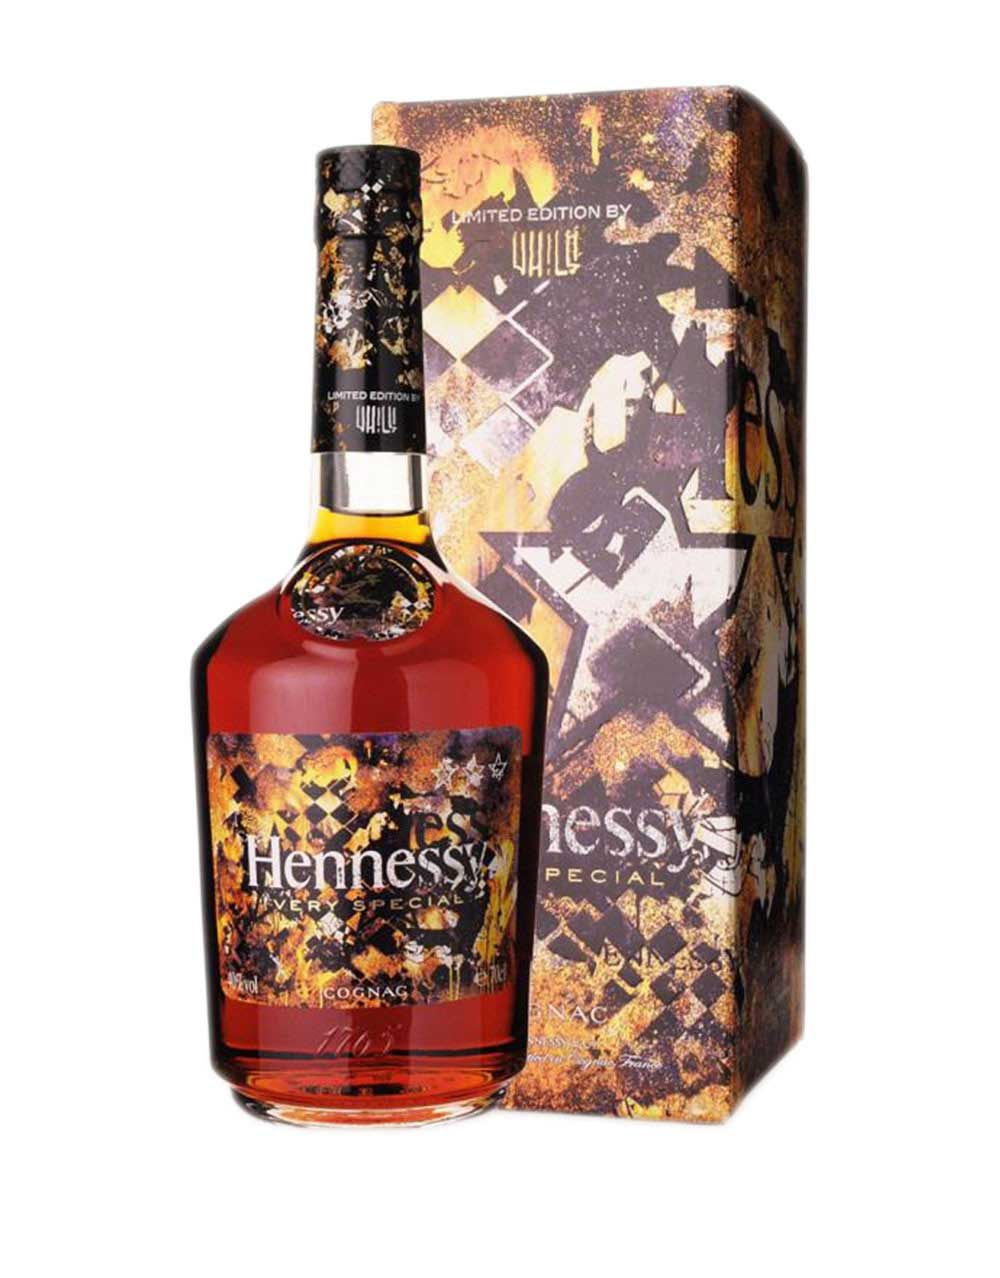 Hennessy V.S Limited Edition by VHILs Cognac